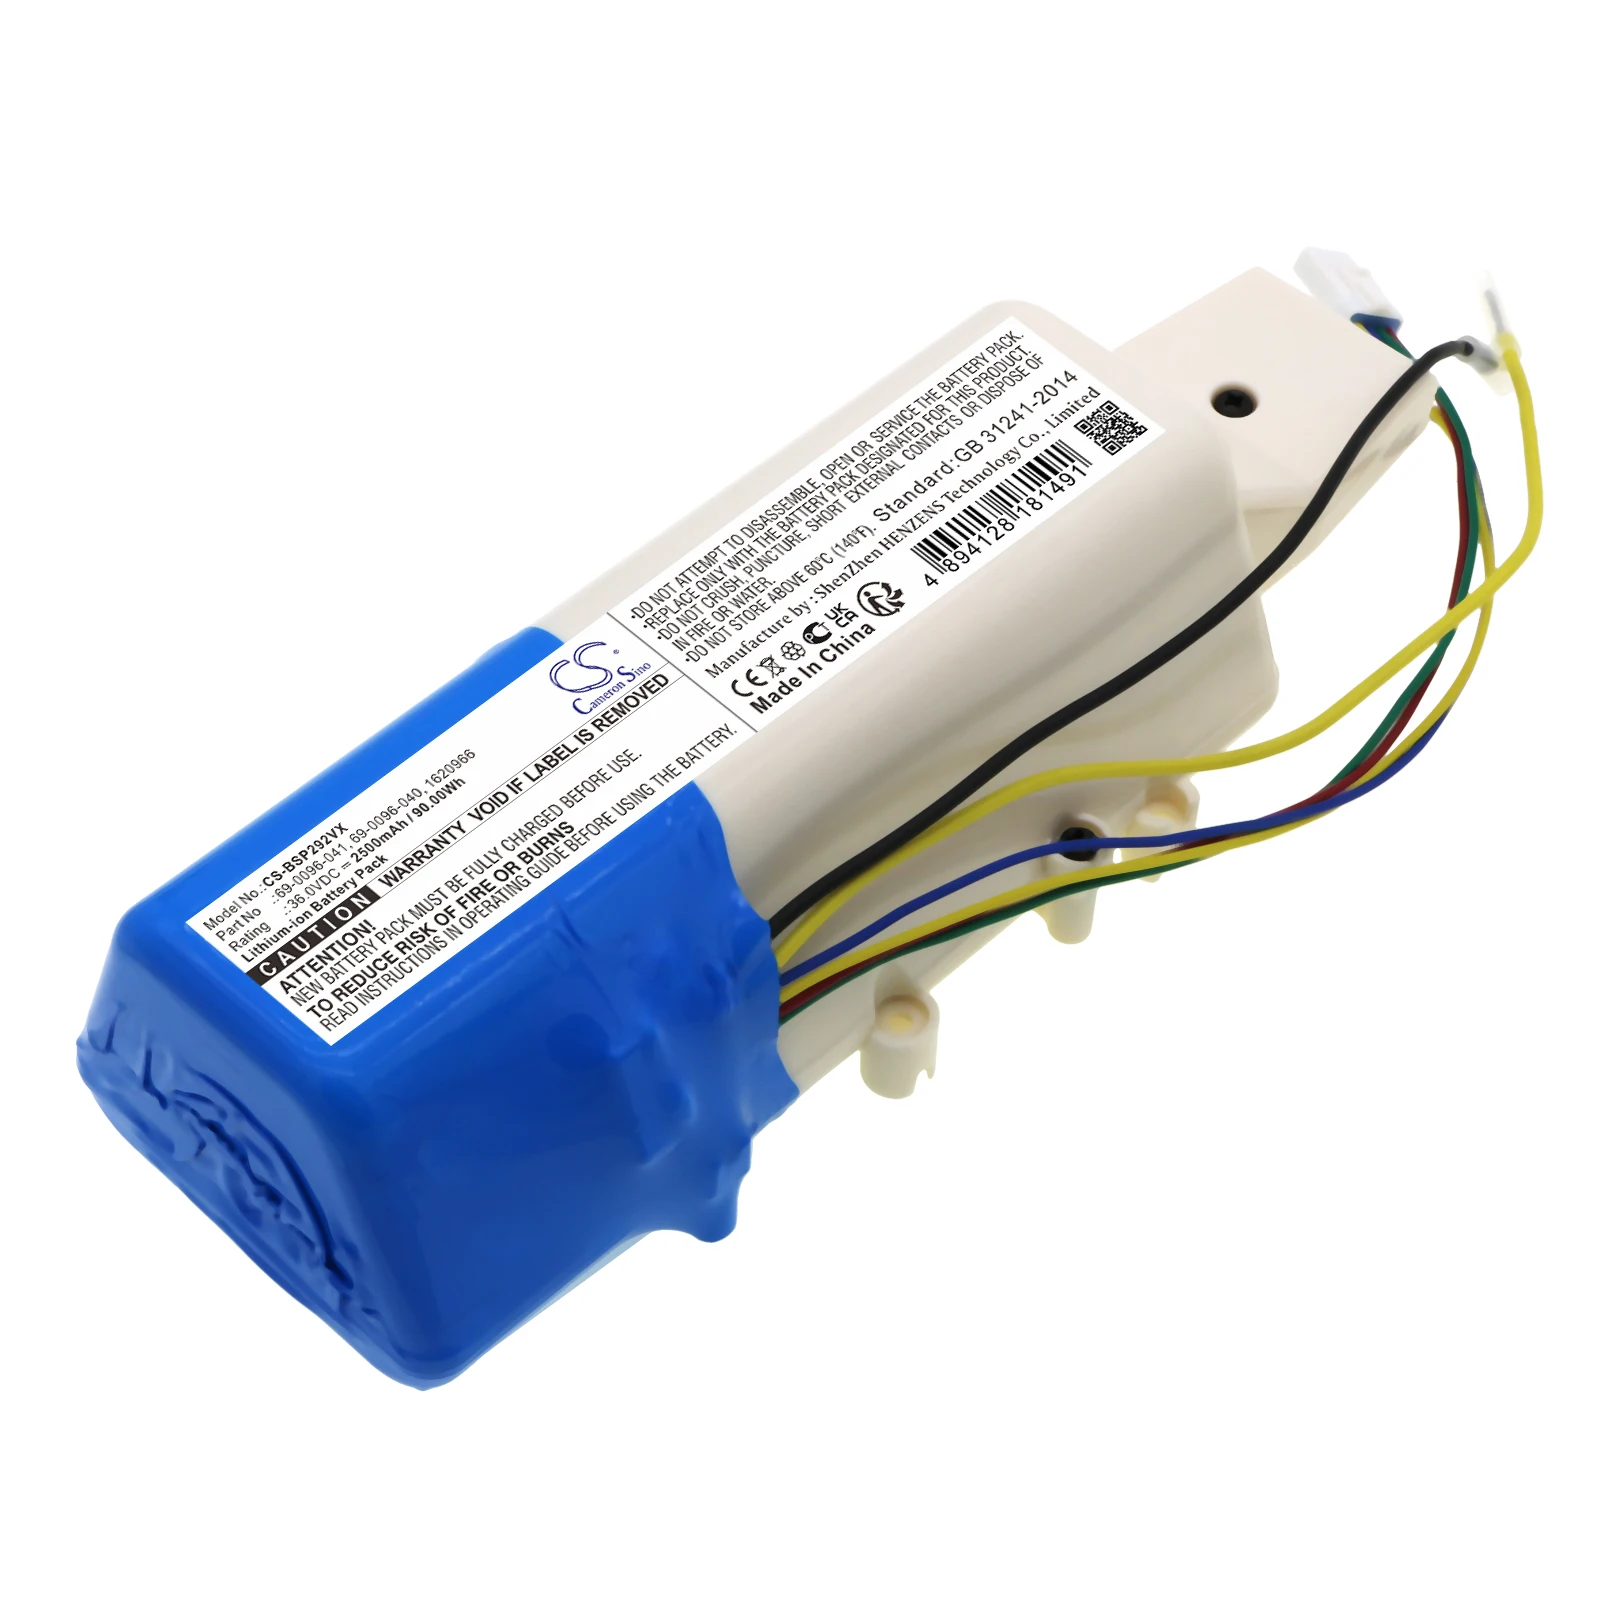 

CS 2500mAh Battery For Bissell 1620966 69-0096-040 69-0096-041 CrossWave Cordless Max P2921 2551 2554 2590 2593 2596 2554A